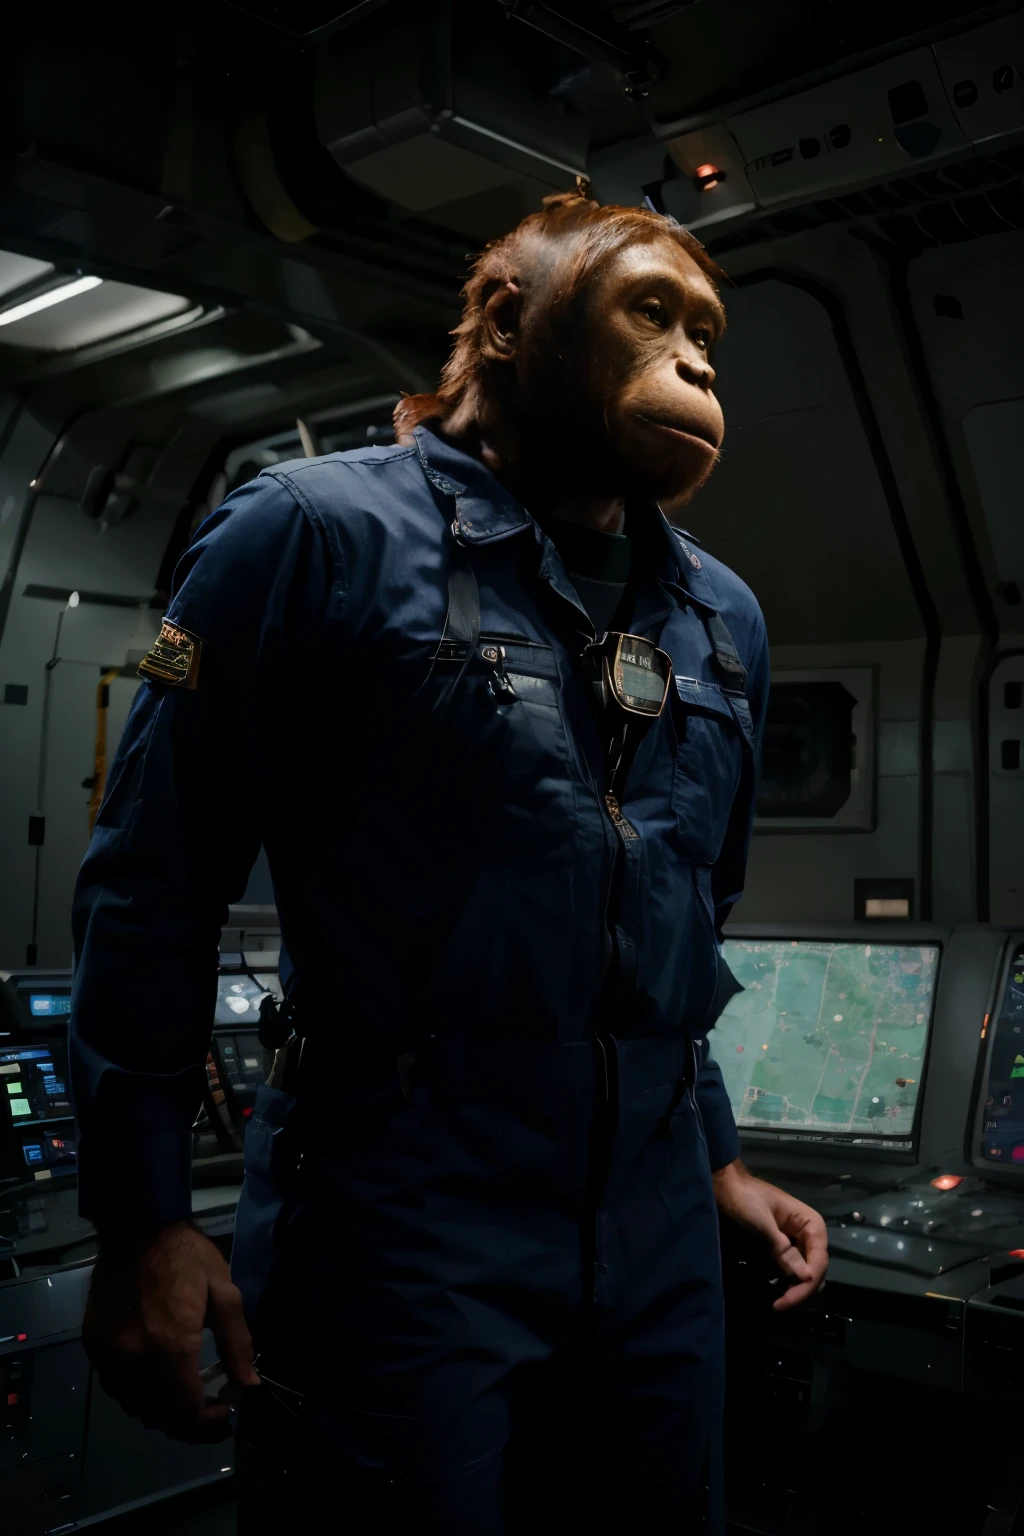 (male orangutan in an engineer officer coverall), male anthropomorphic orangutan naval officer, (photo realistic ape officer in uniform on a space ship bridge), hyper realistic ape officer talking to a crew member nearby, futuristic space ship scene, (wearing a blue navy uniform)